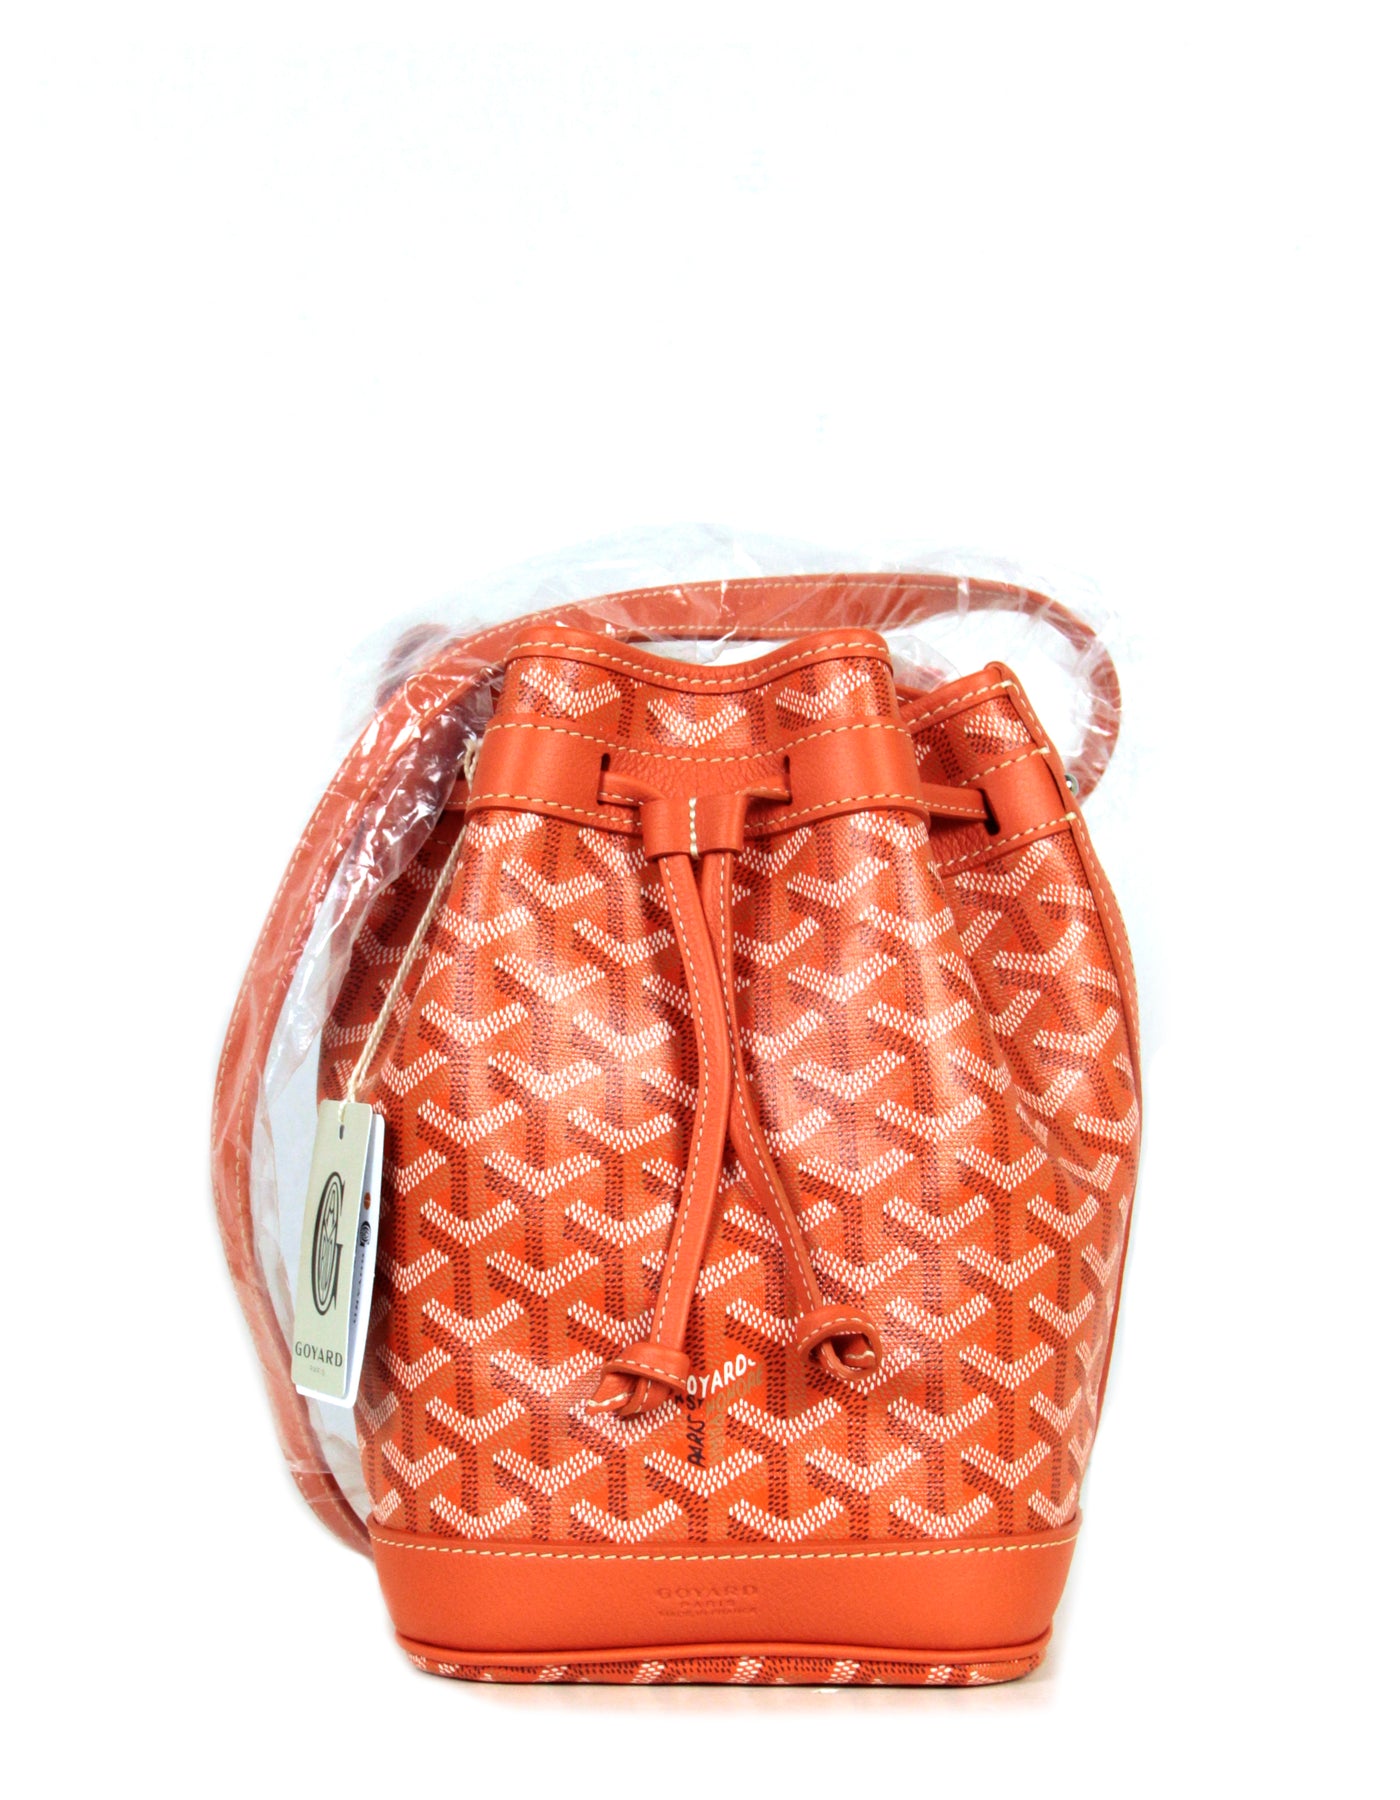 Goyard Petit Flot bucket bag, which color would you like to choose